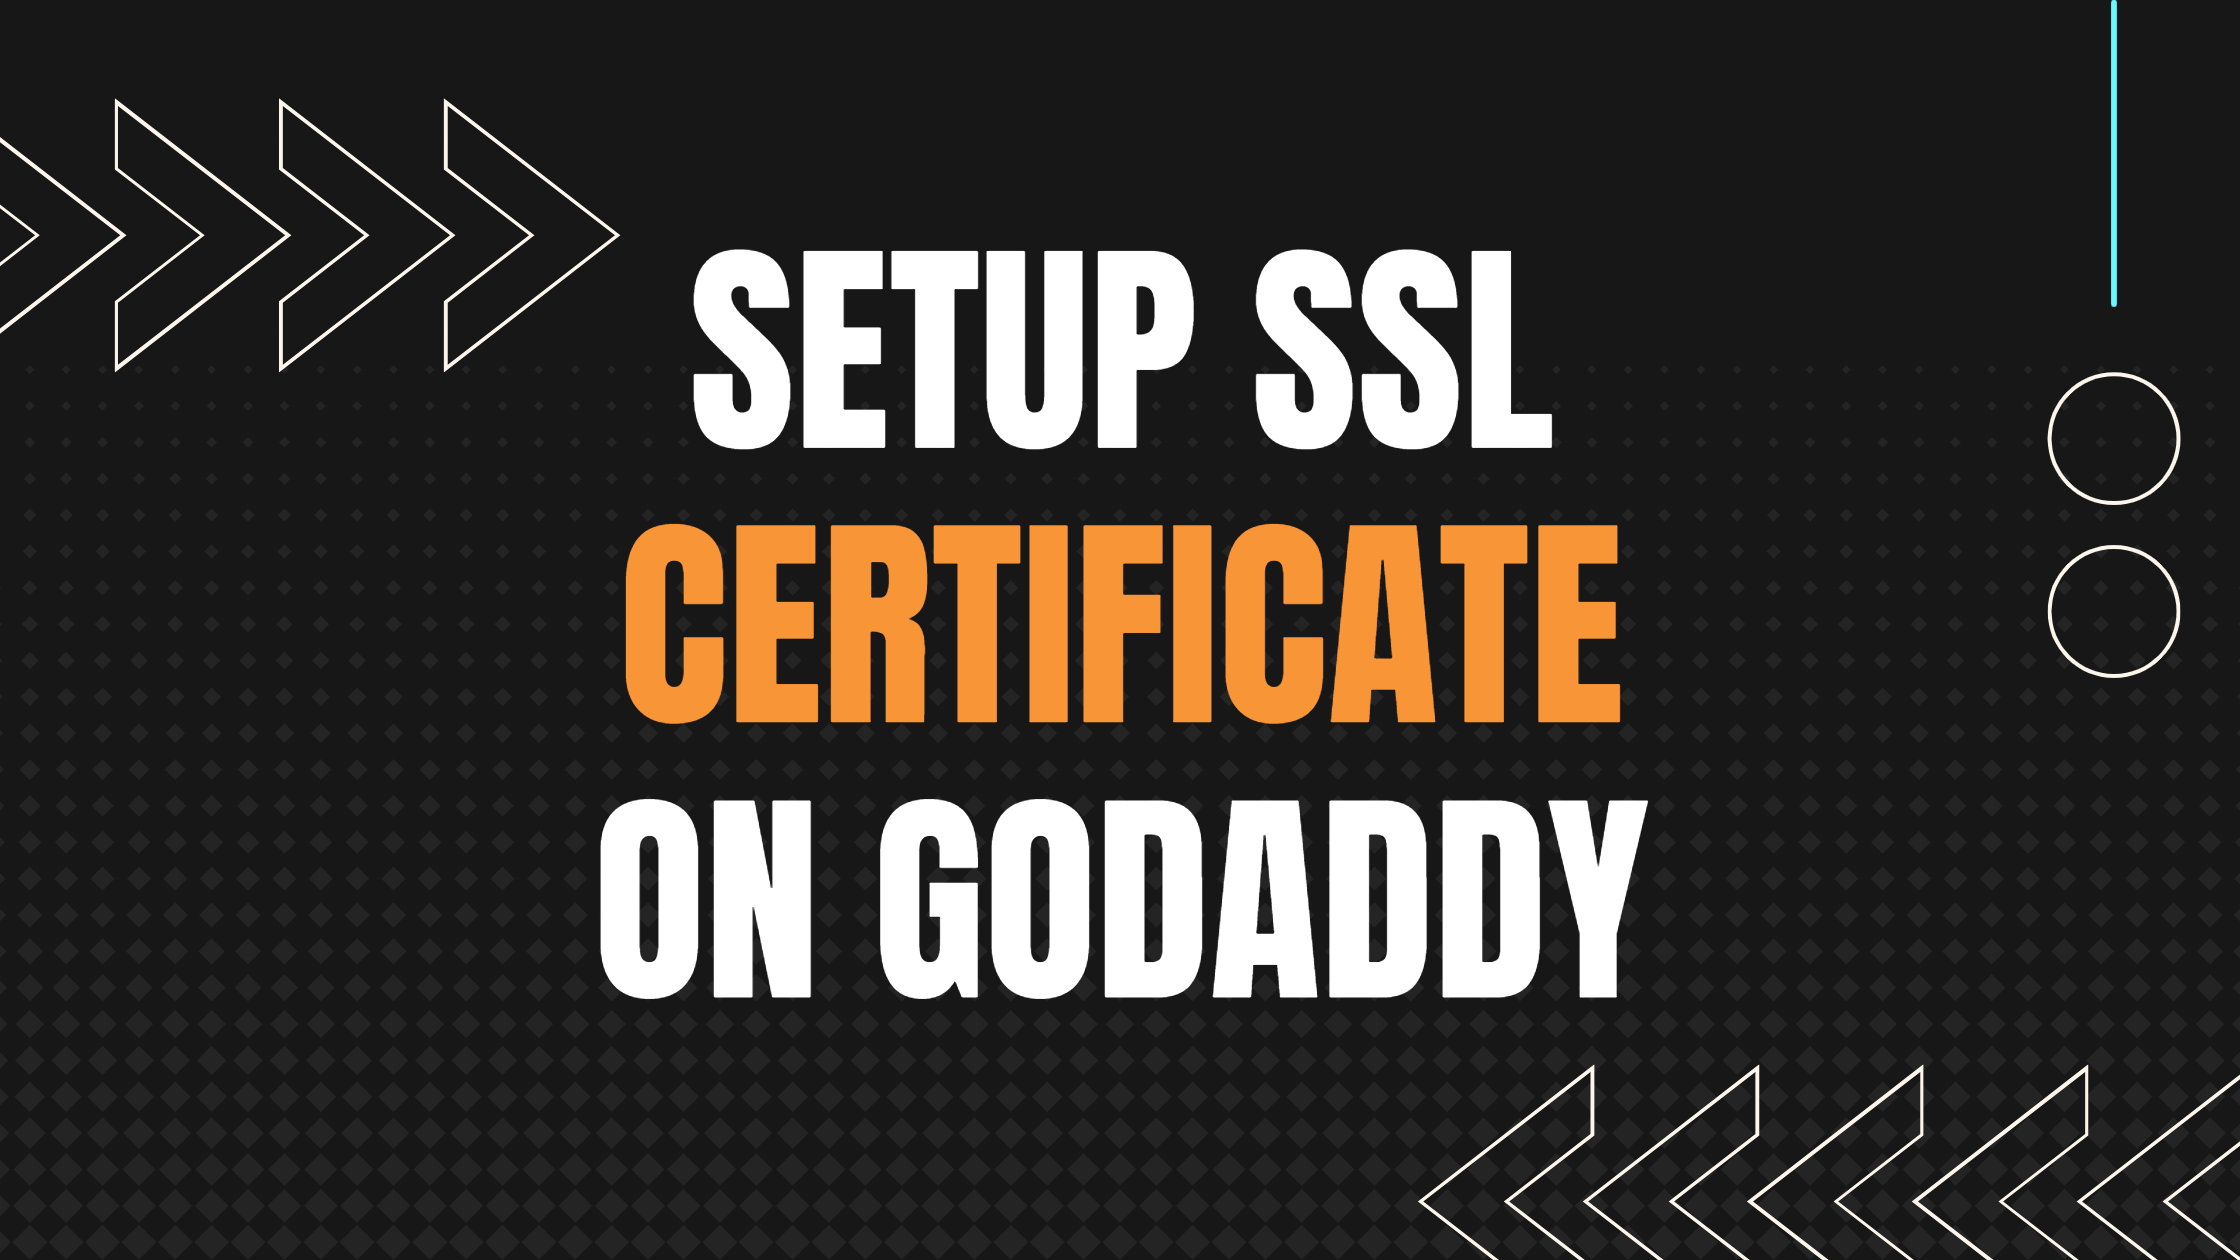 How to set up a free SSL certificate on GoDaddy